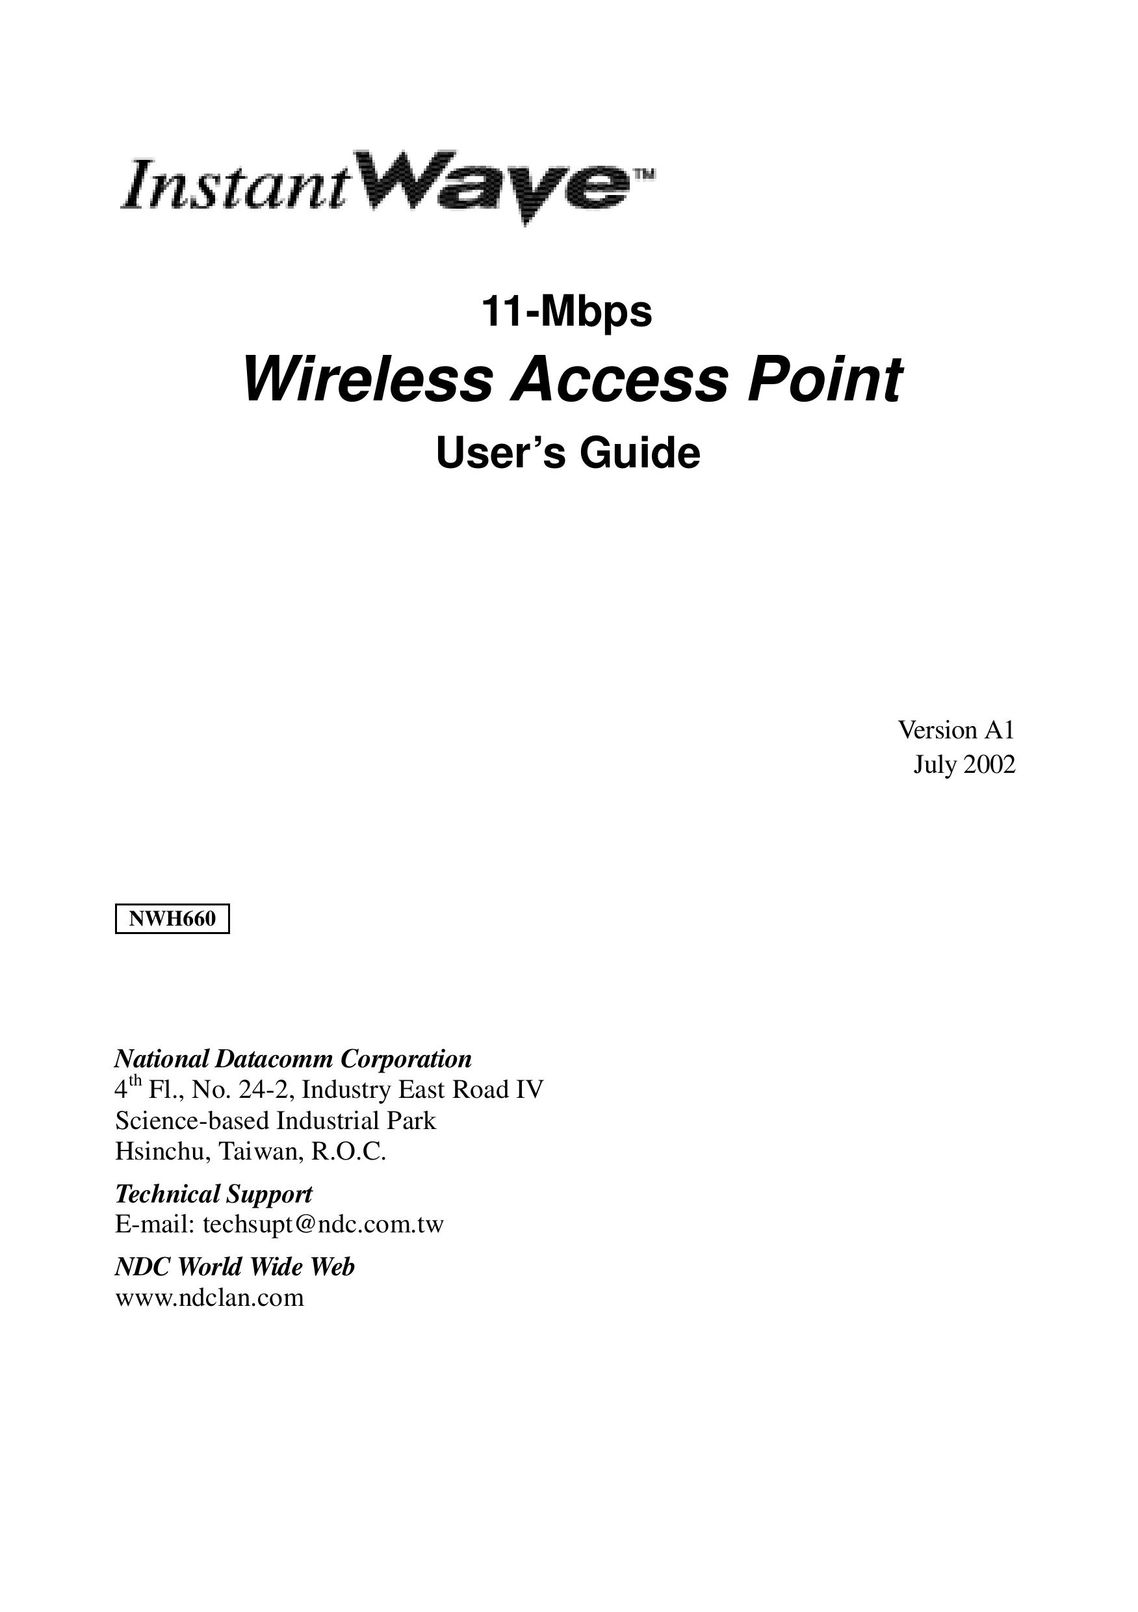 NDC comm NWH660 Network Router User Manual